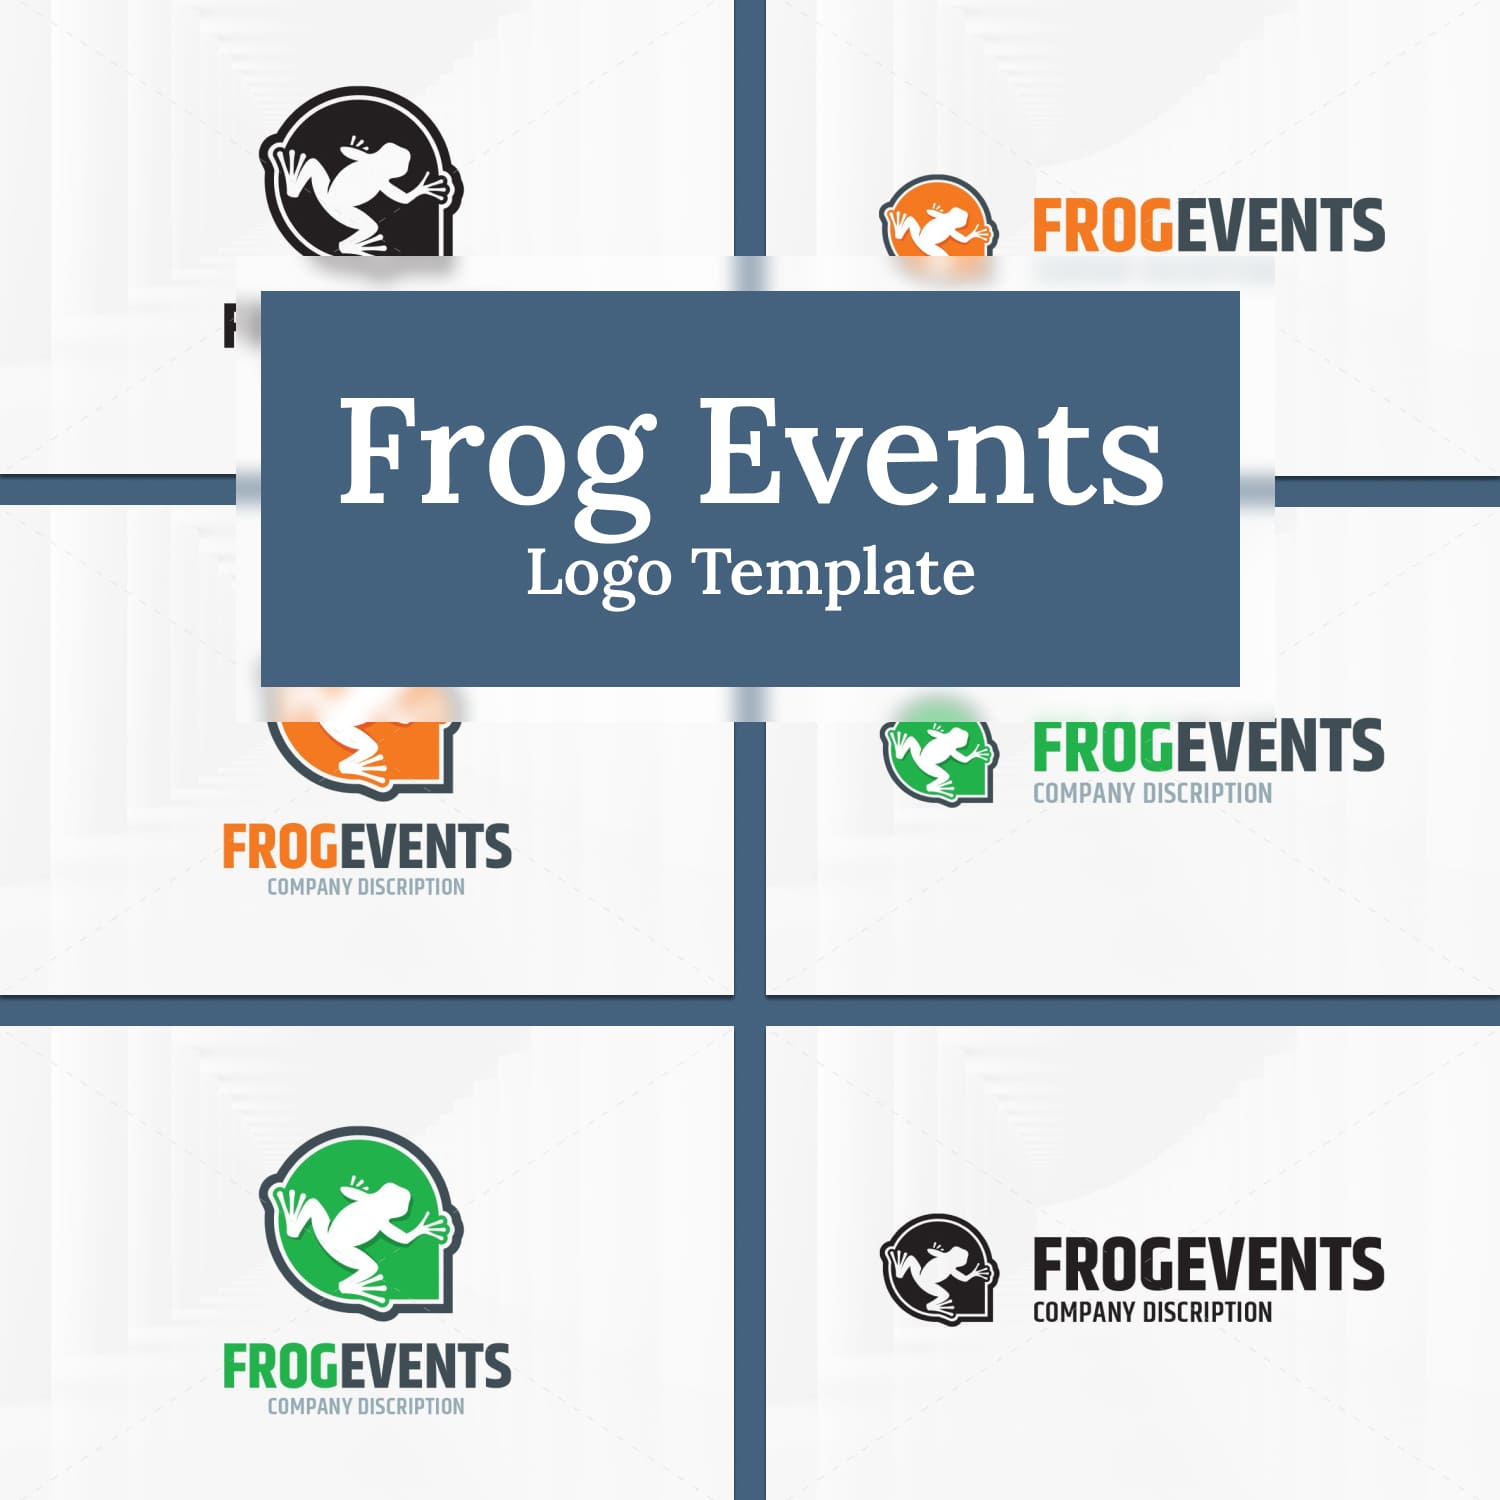 Frog events logo template - main image preview.